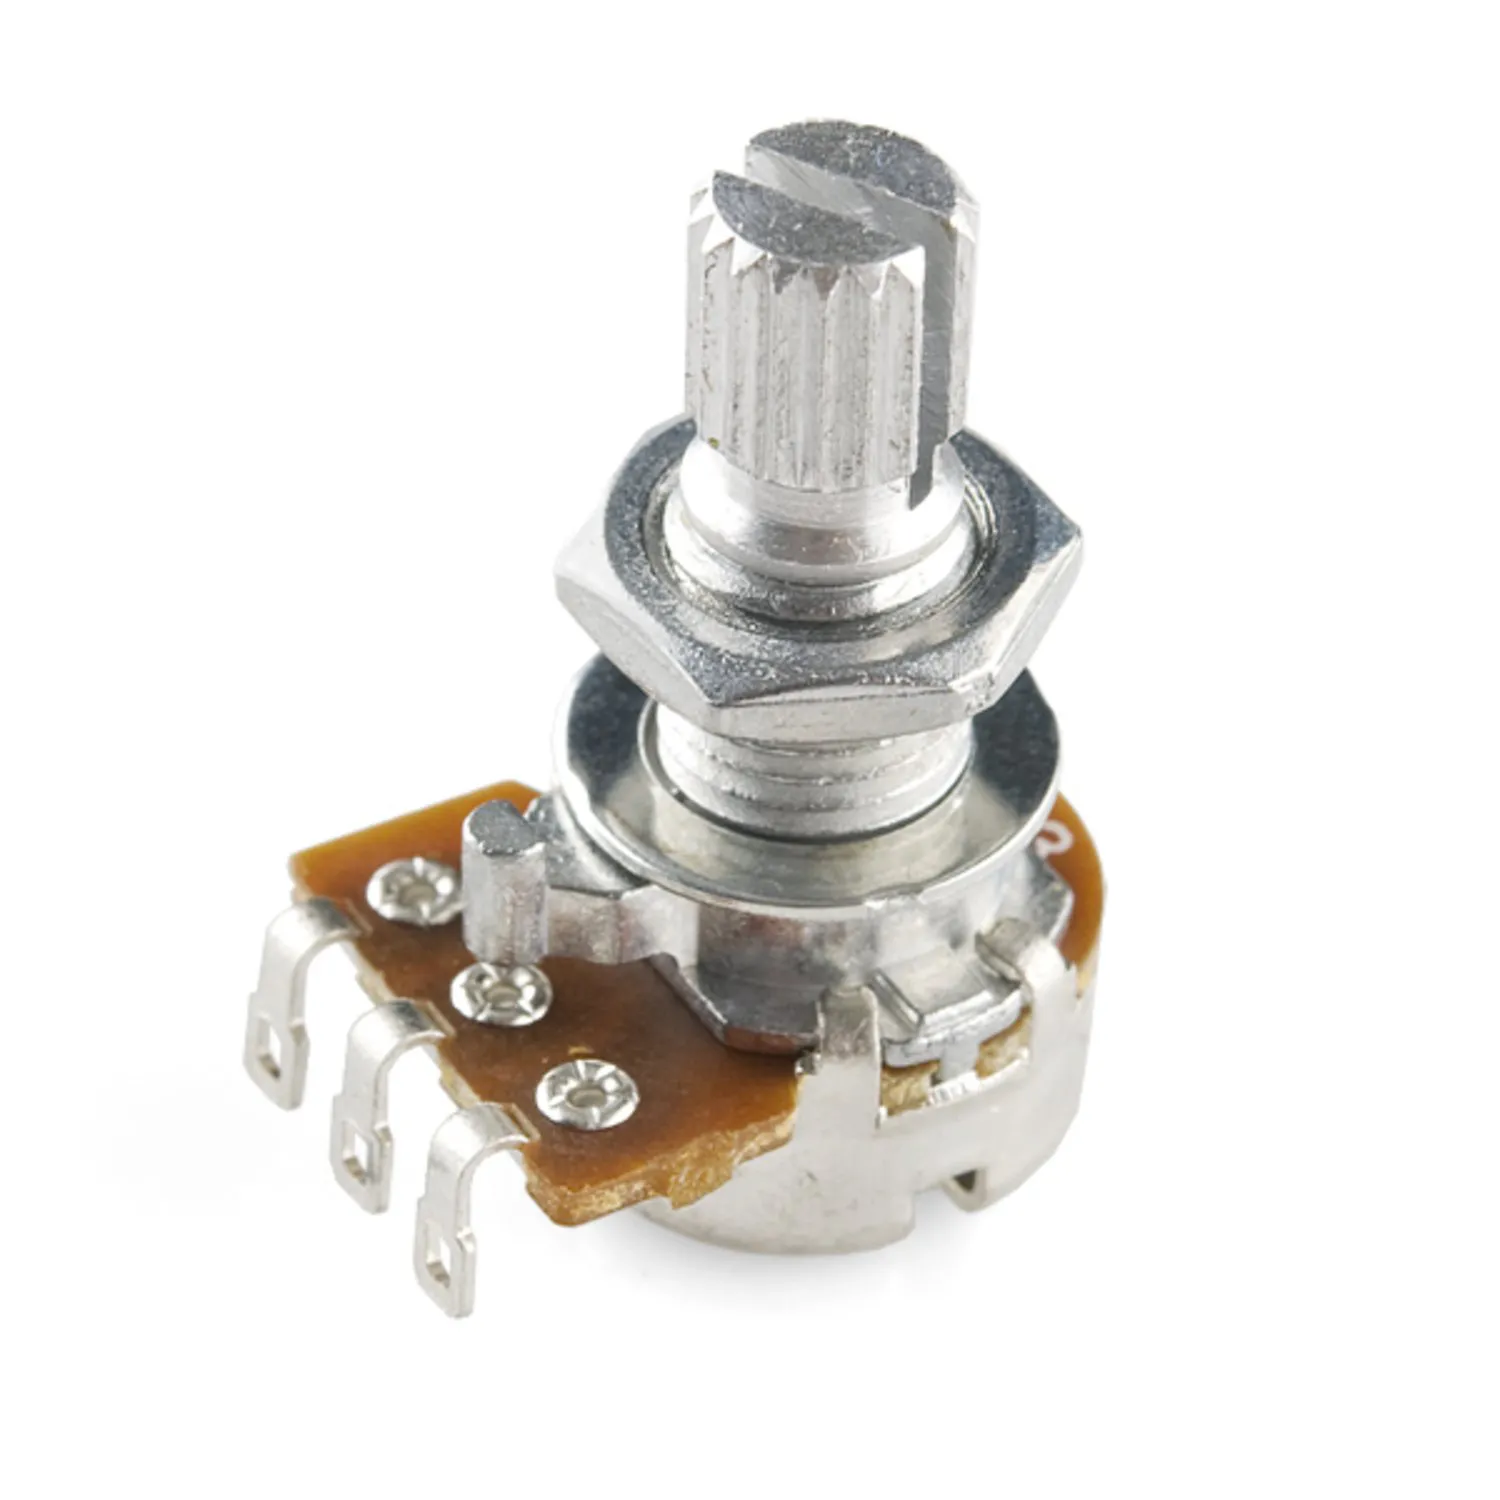 Photo of Rotary Potentiometer - 10k Ohm, Linear